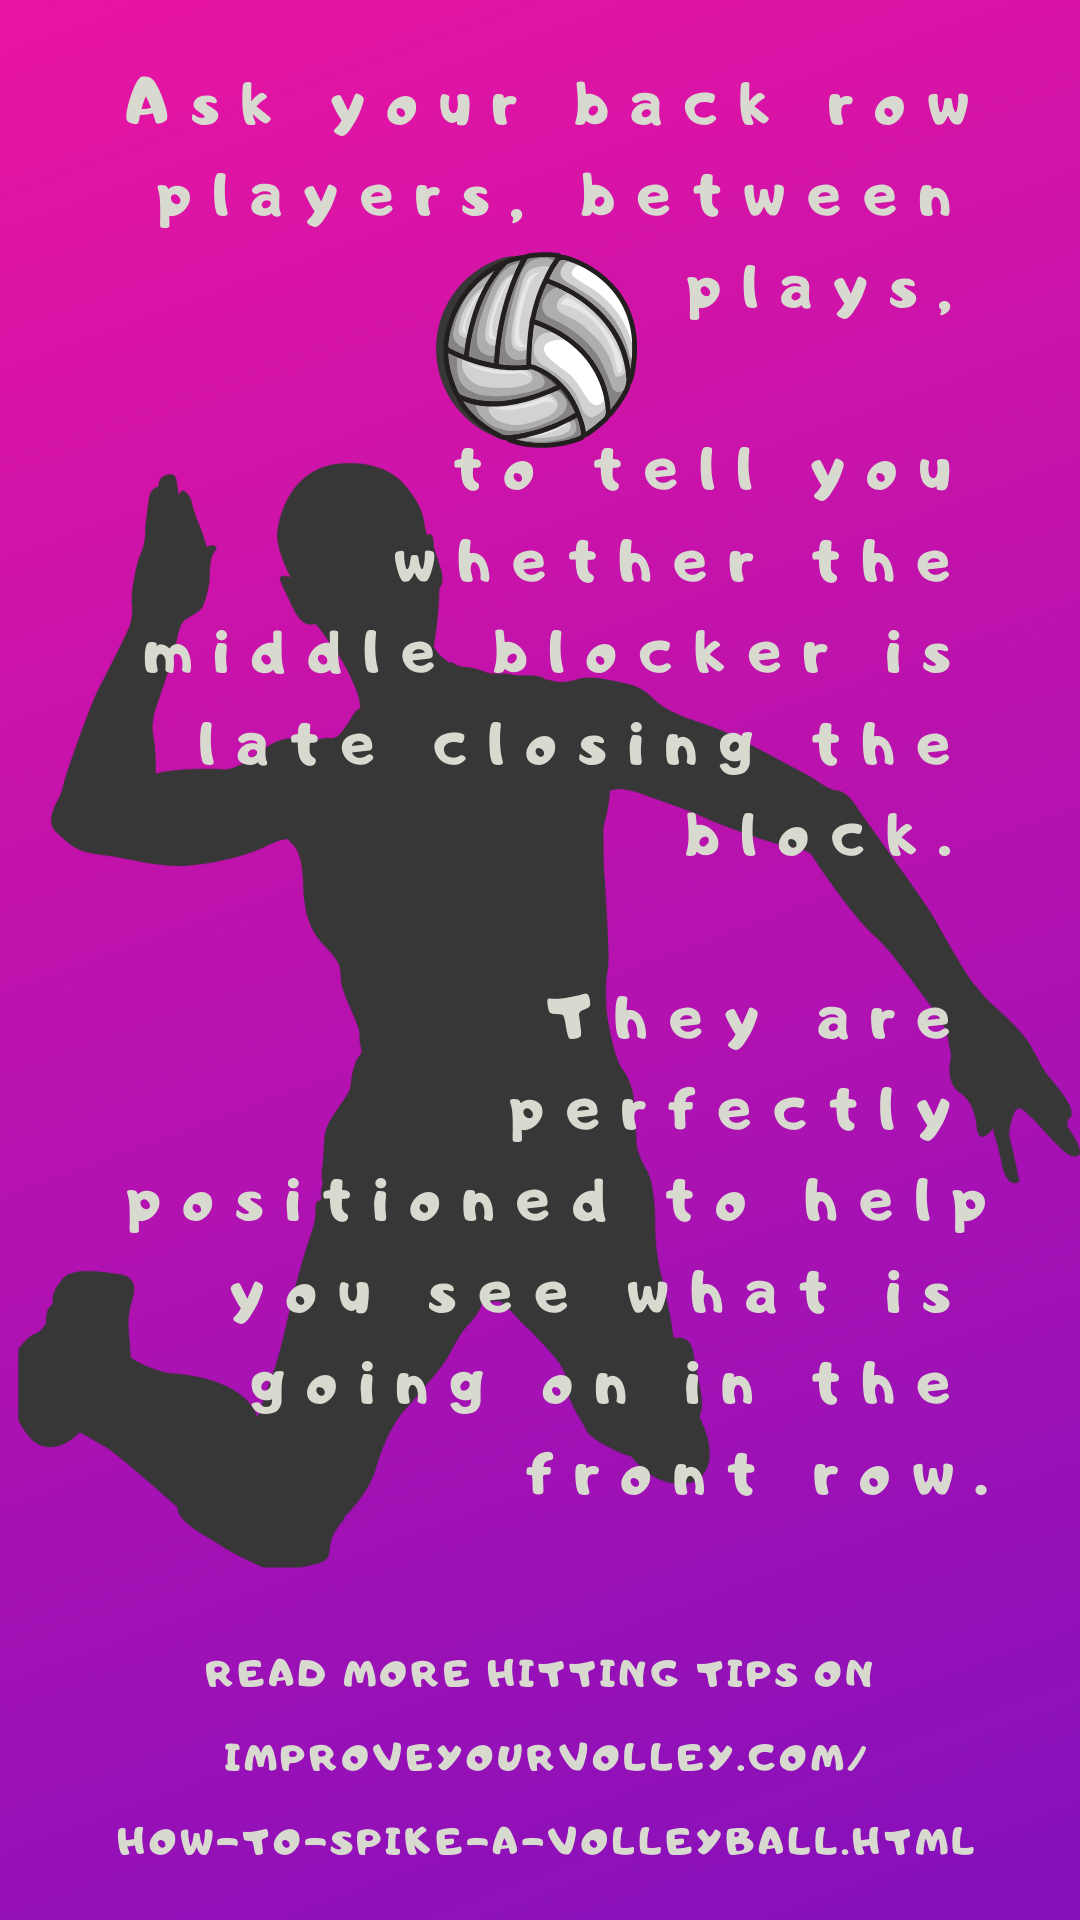 Ask your back row players, between plays, to tell you whether the middle blocker is late closing the block. They are perfectly positioned to help you see